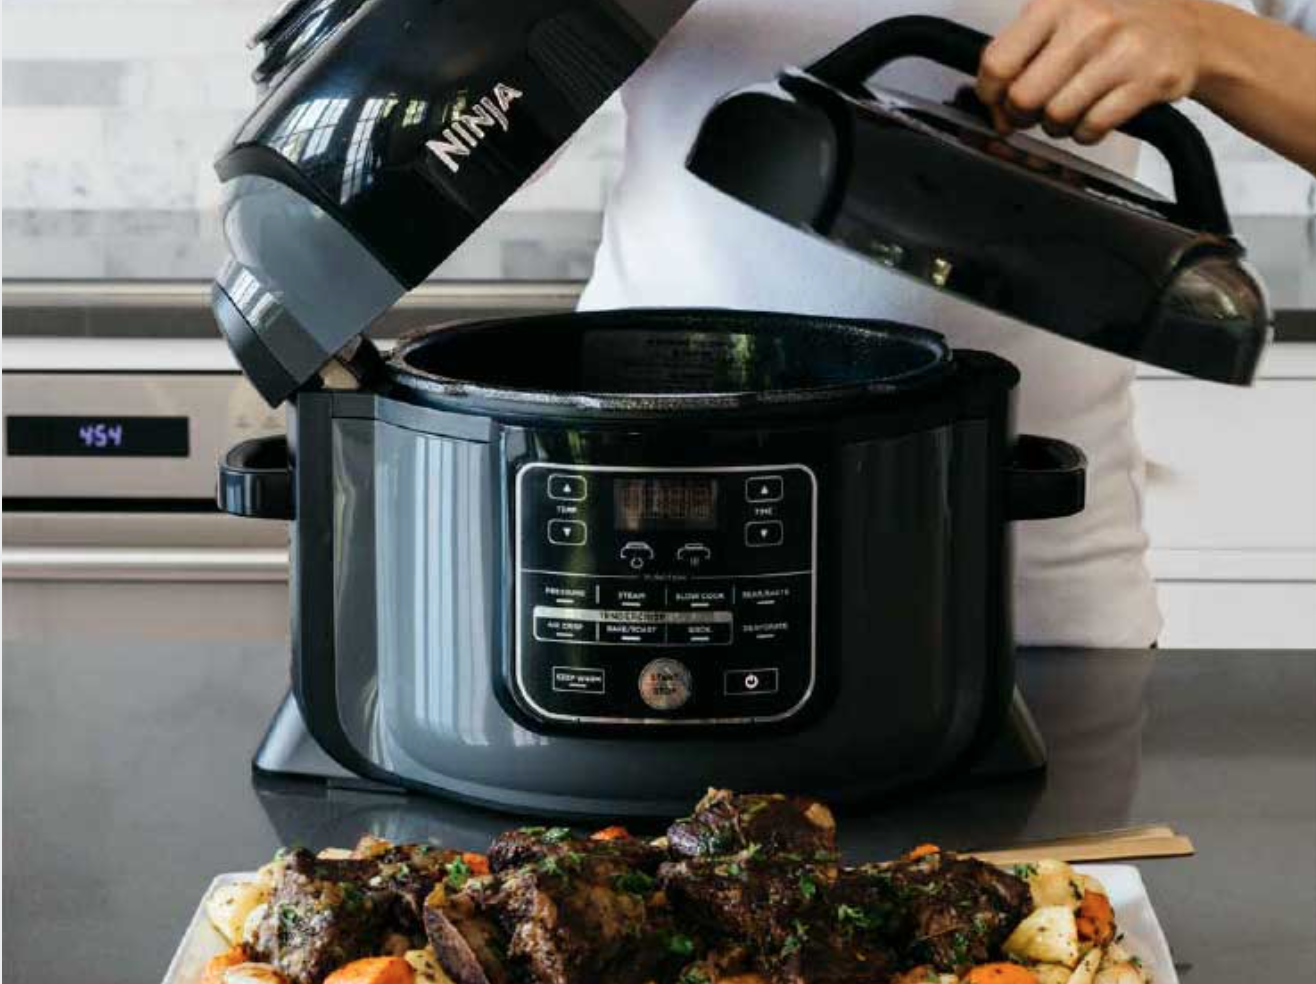 The Crock-Pot 8-in-1 multi-use cooker is on sale for $20 off at